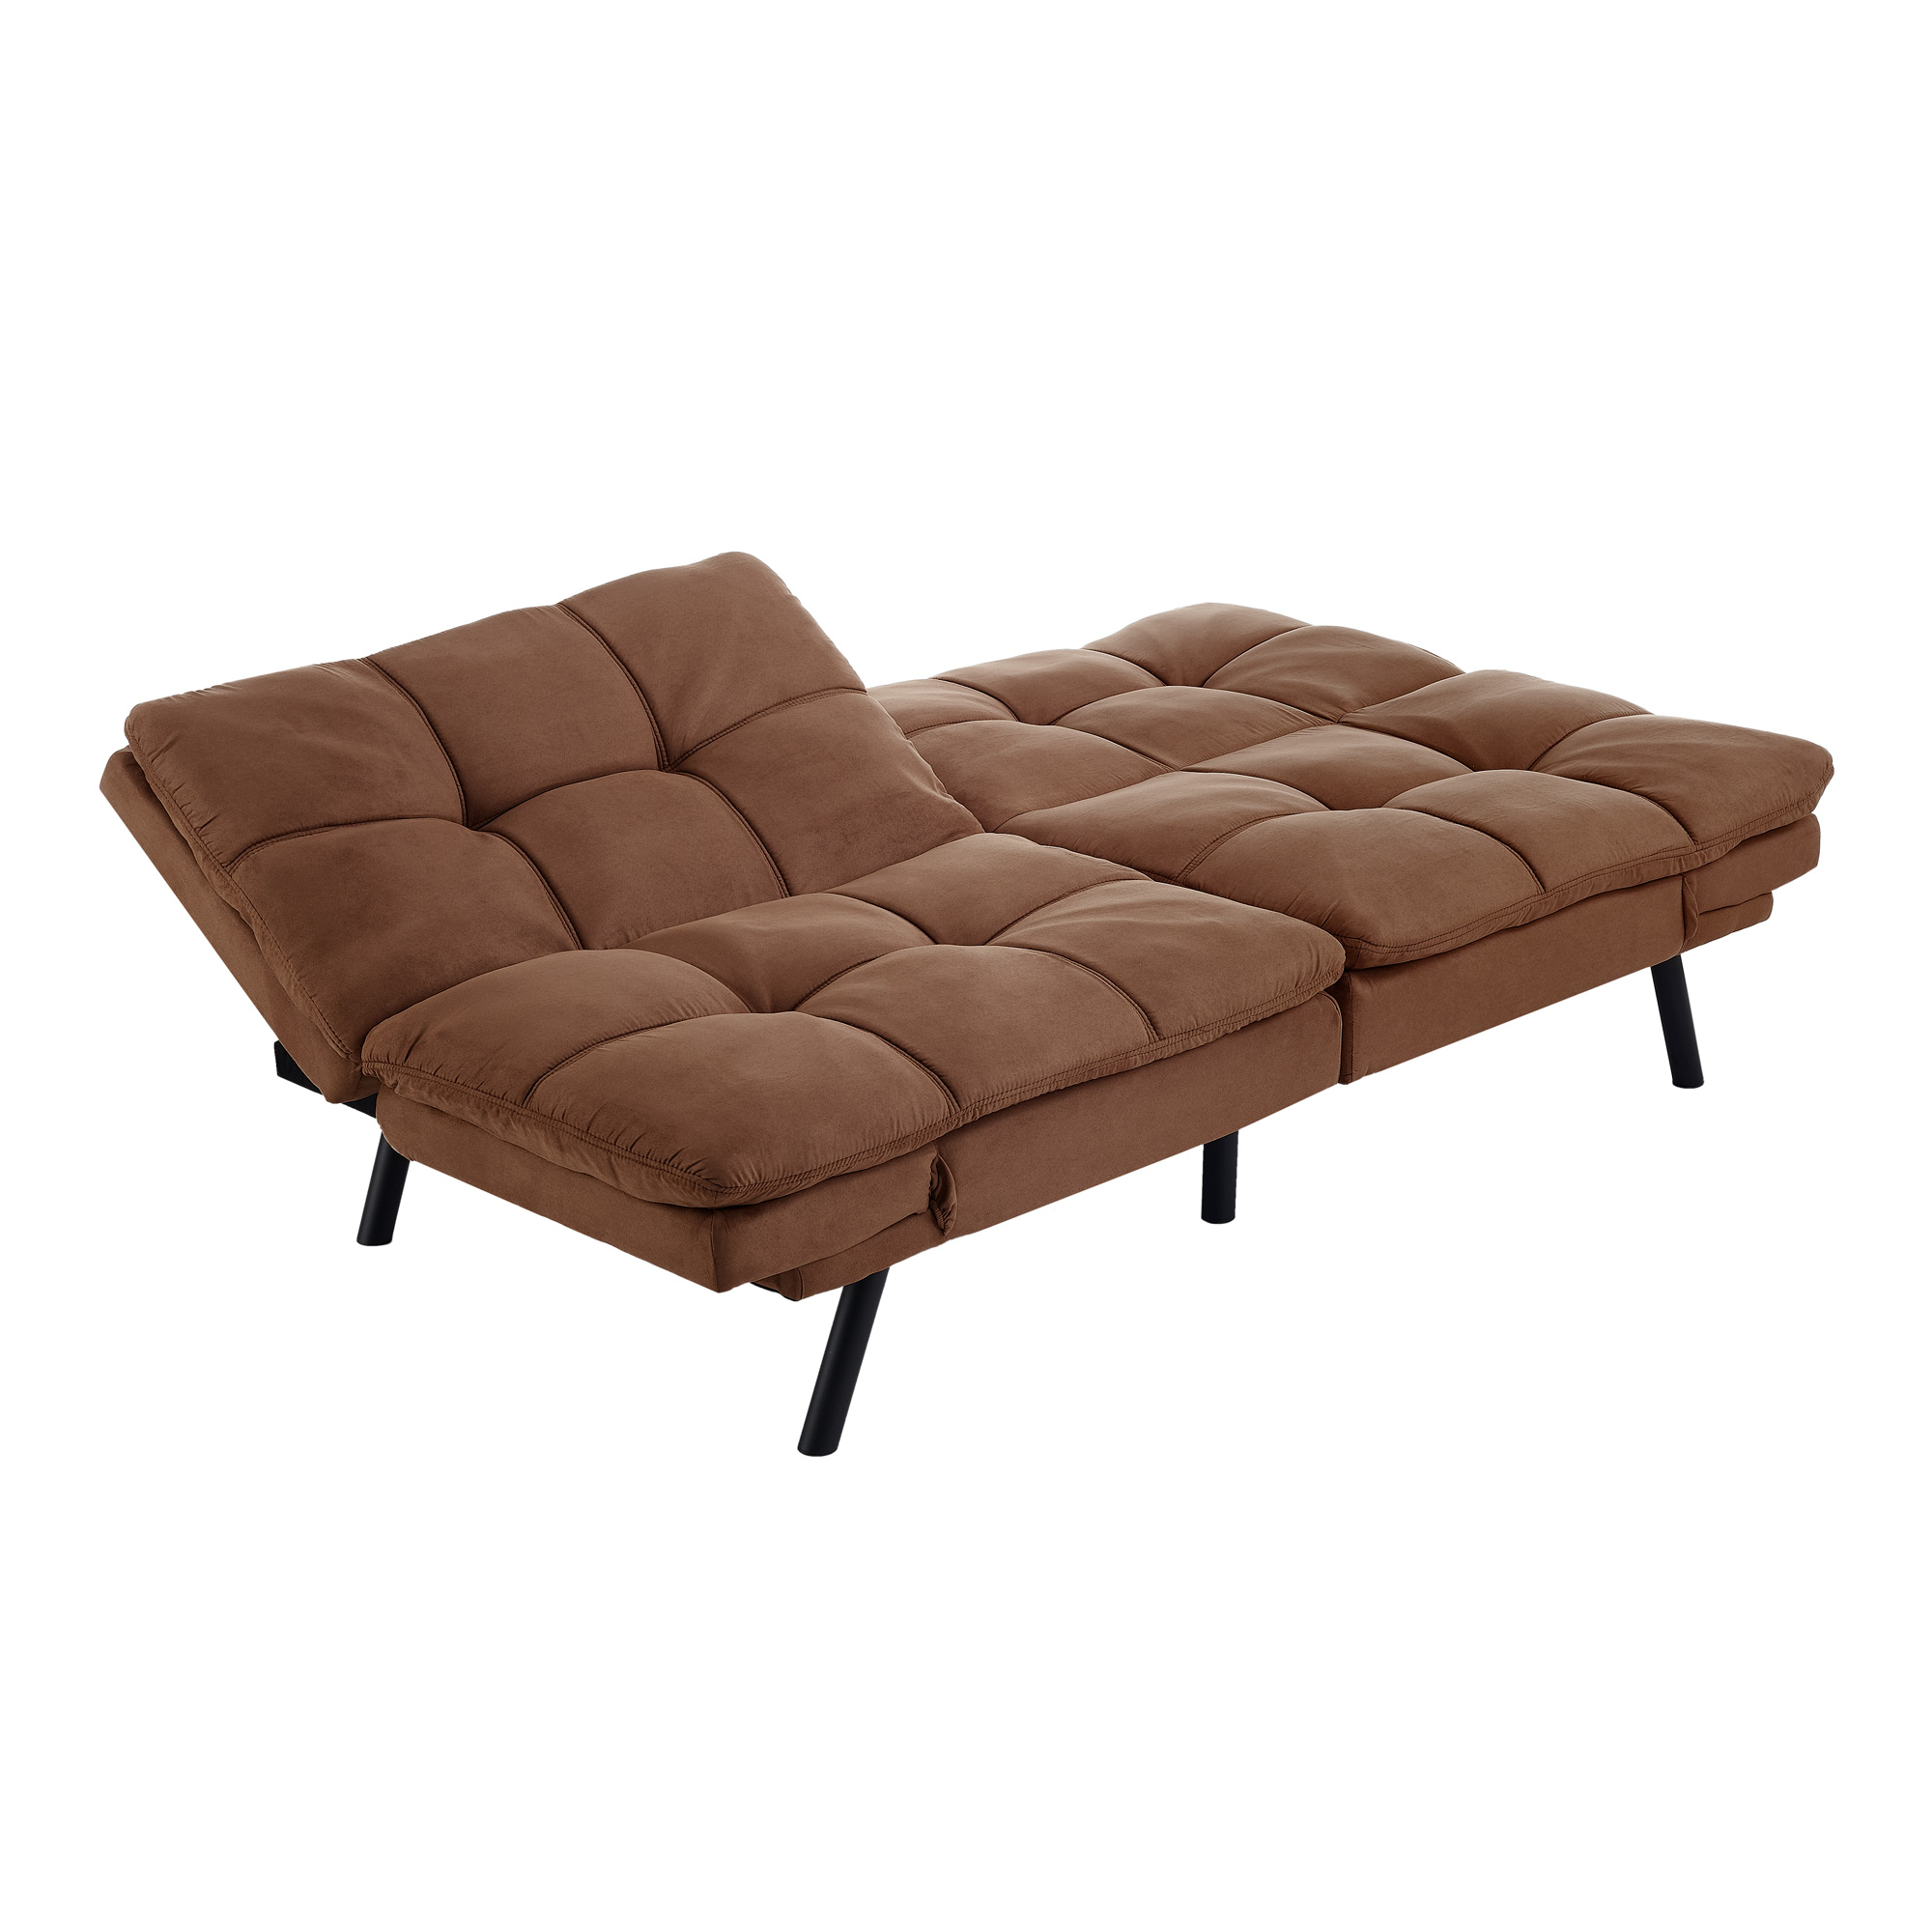 Mainstays Memory Foam Futon with Adjustable Armrests , Camel Faux Suede Fabric for Adults - image 6 of 9